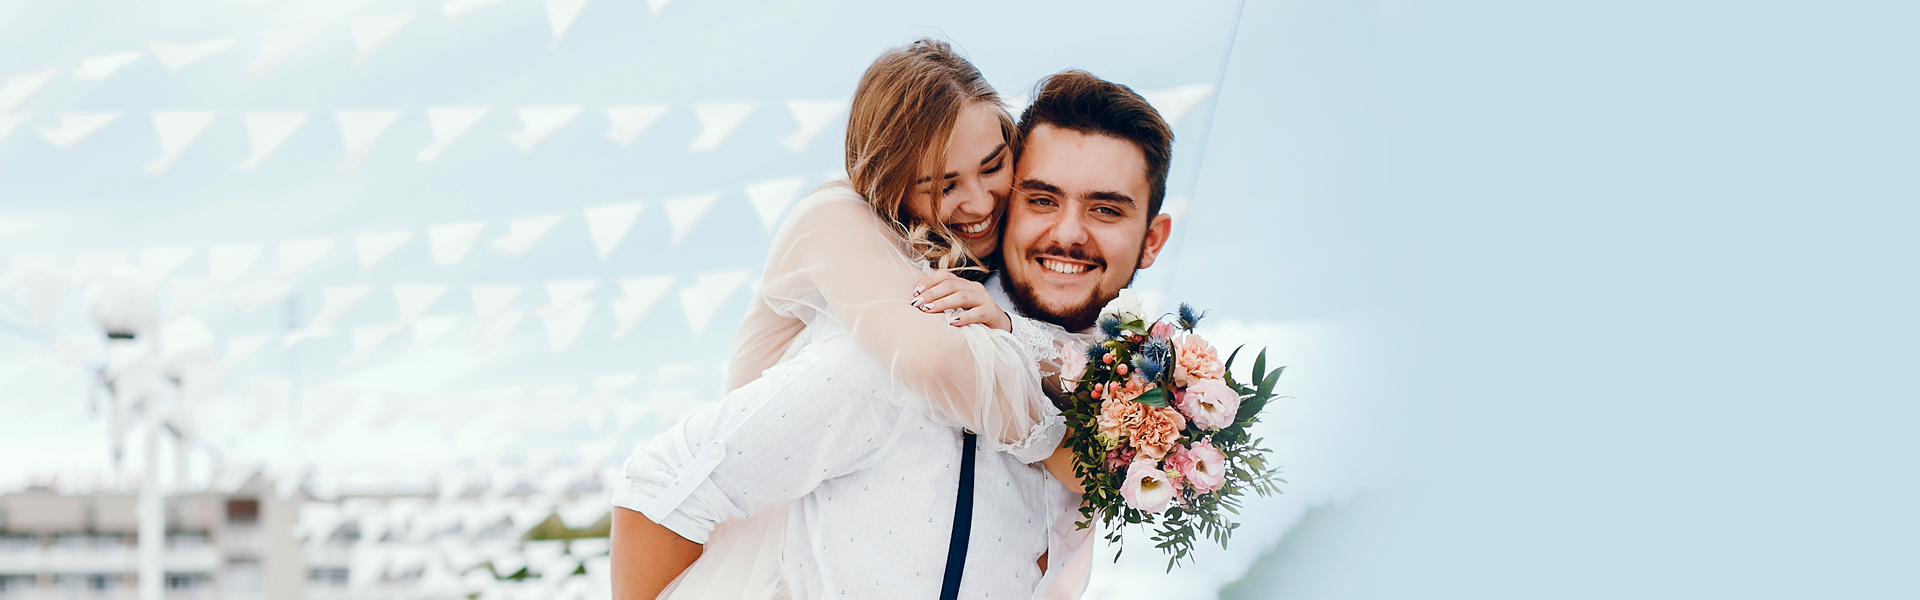 3 Dental Treatments to Get Before Your Wedding Day